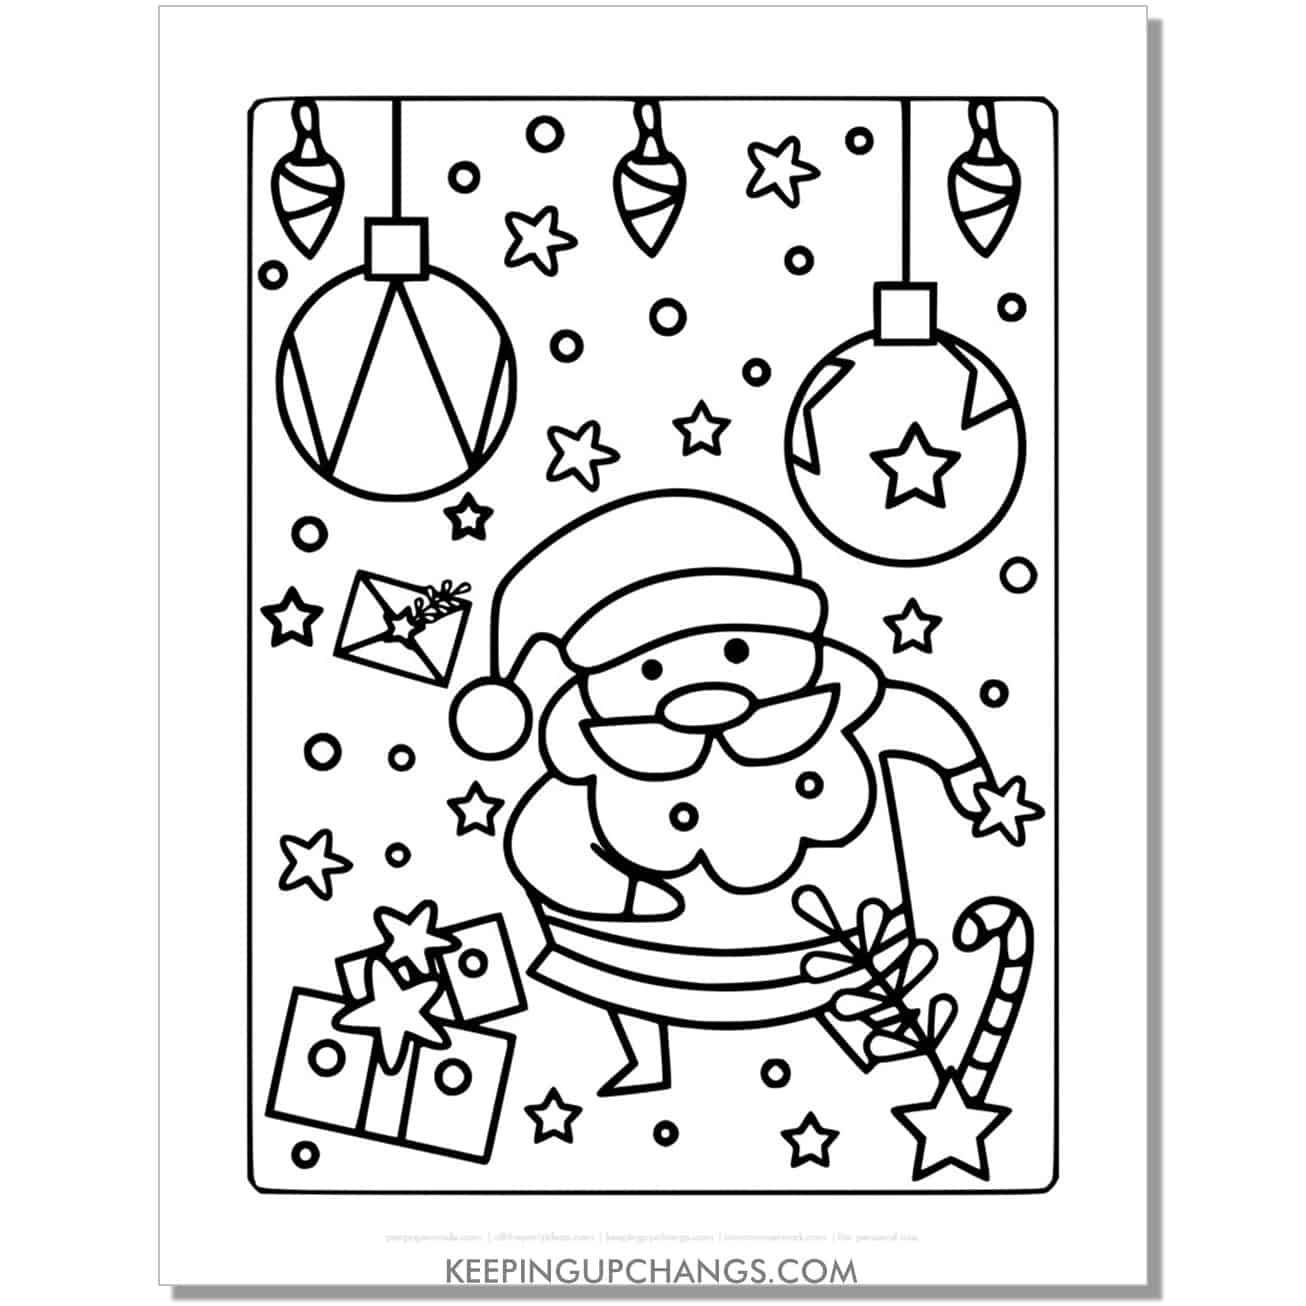 free fun, detailed santa with ornaments, lights coloring page.